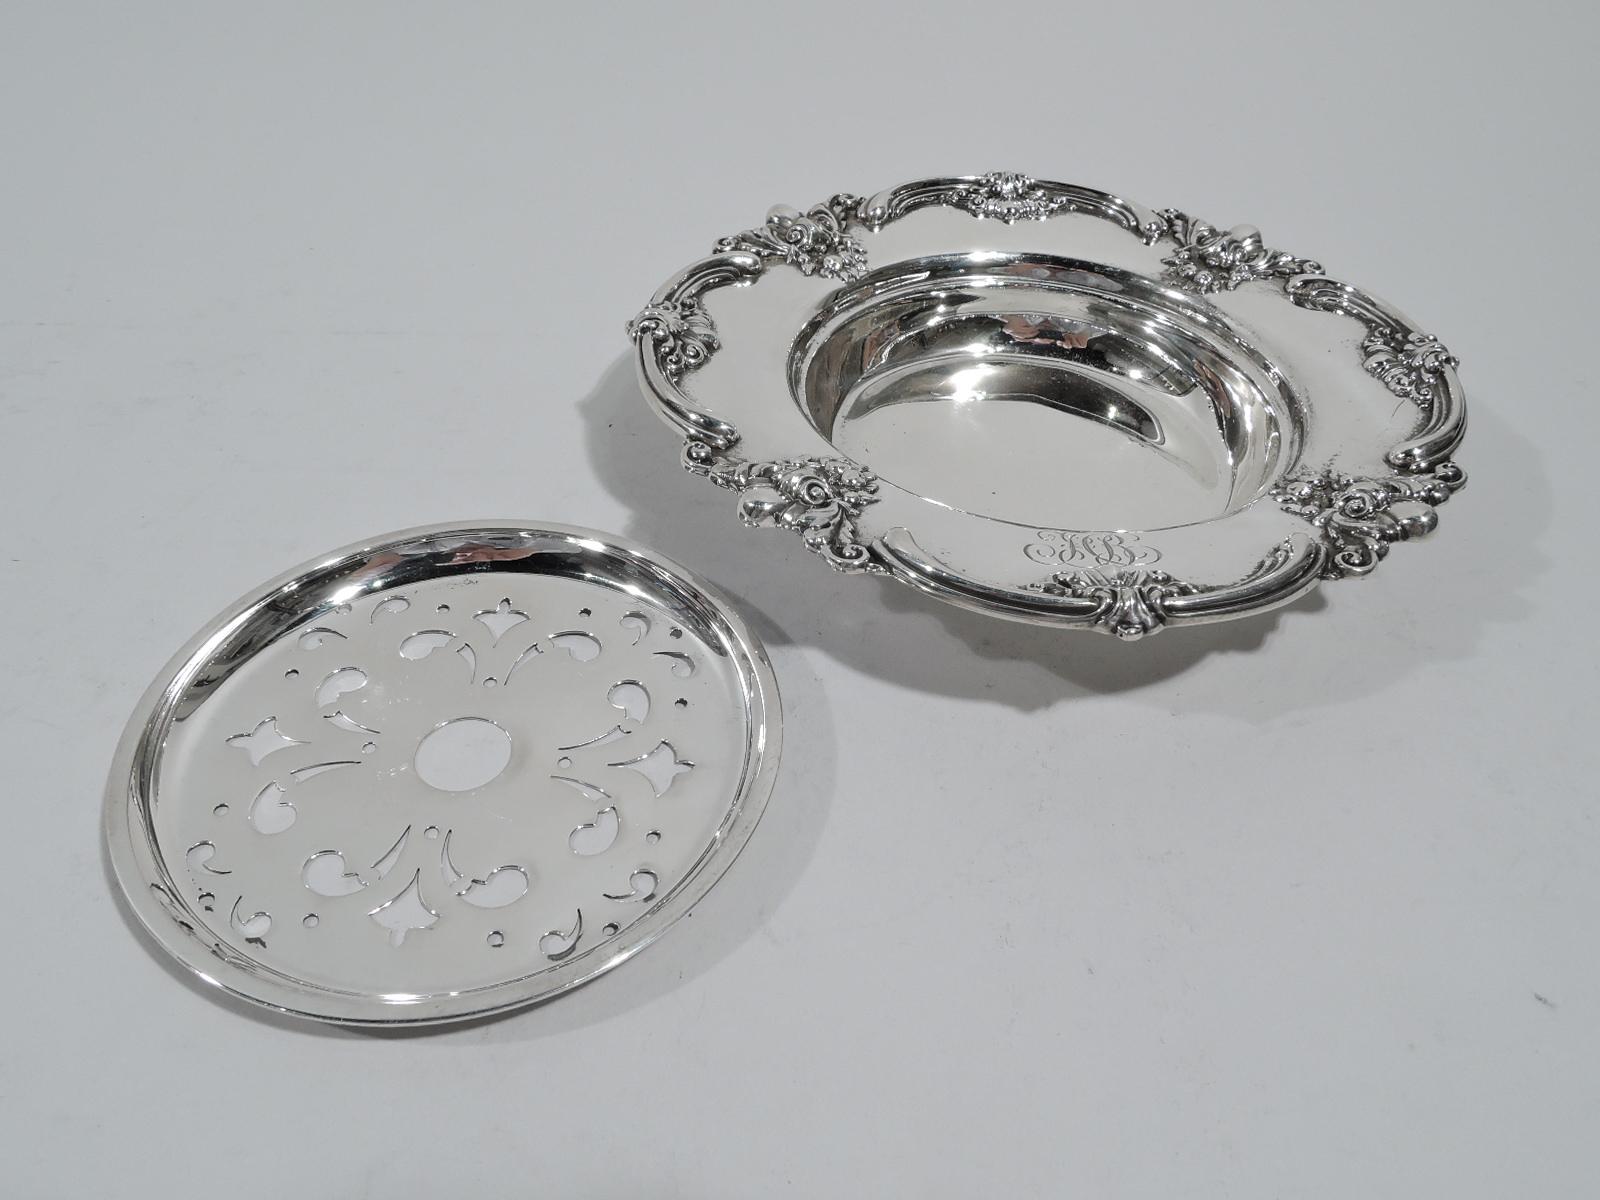 Turn-of-the-century Edwardian sterling silver butter dish. Made by Black, Starr & Frost in New York. Deep round well and Lobed rim with applied scrolls, leaves, and flowers, and engraved interlaced script monogram. Tray has ornamental piercing.